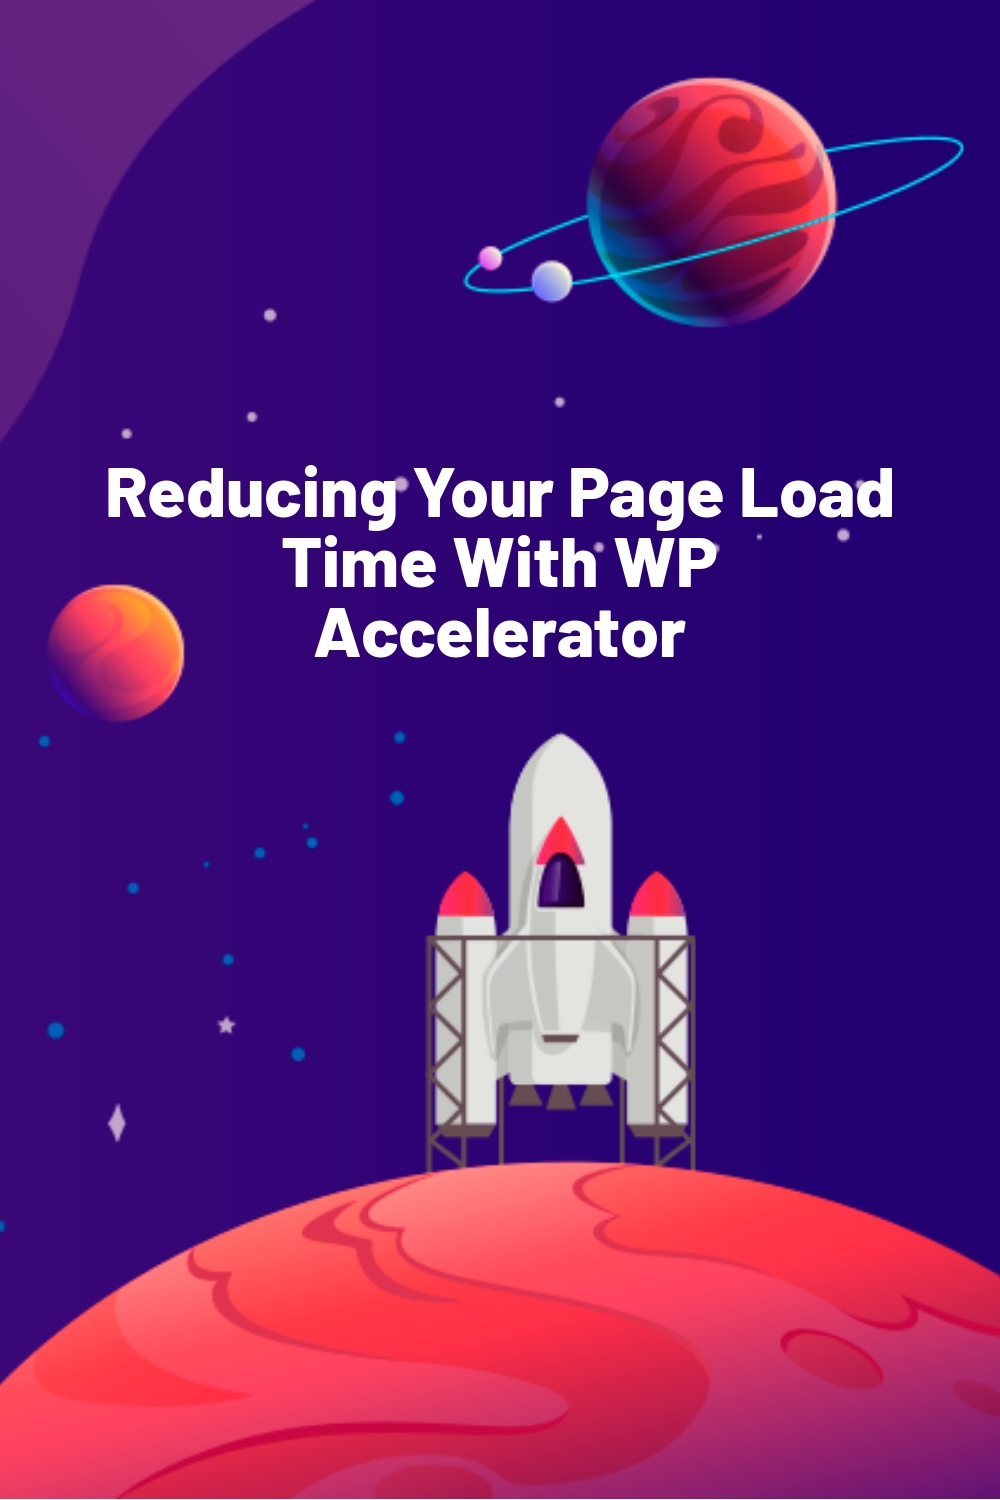 Reducing Your Page Load Time With WP Accelerator